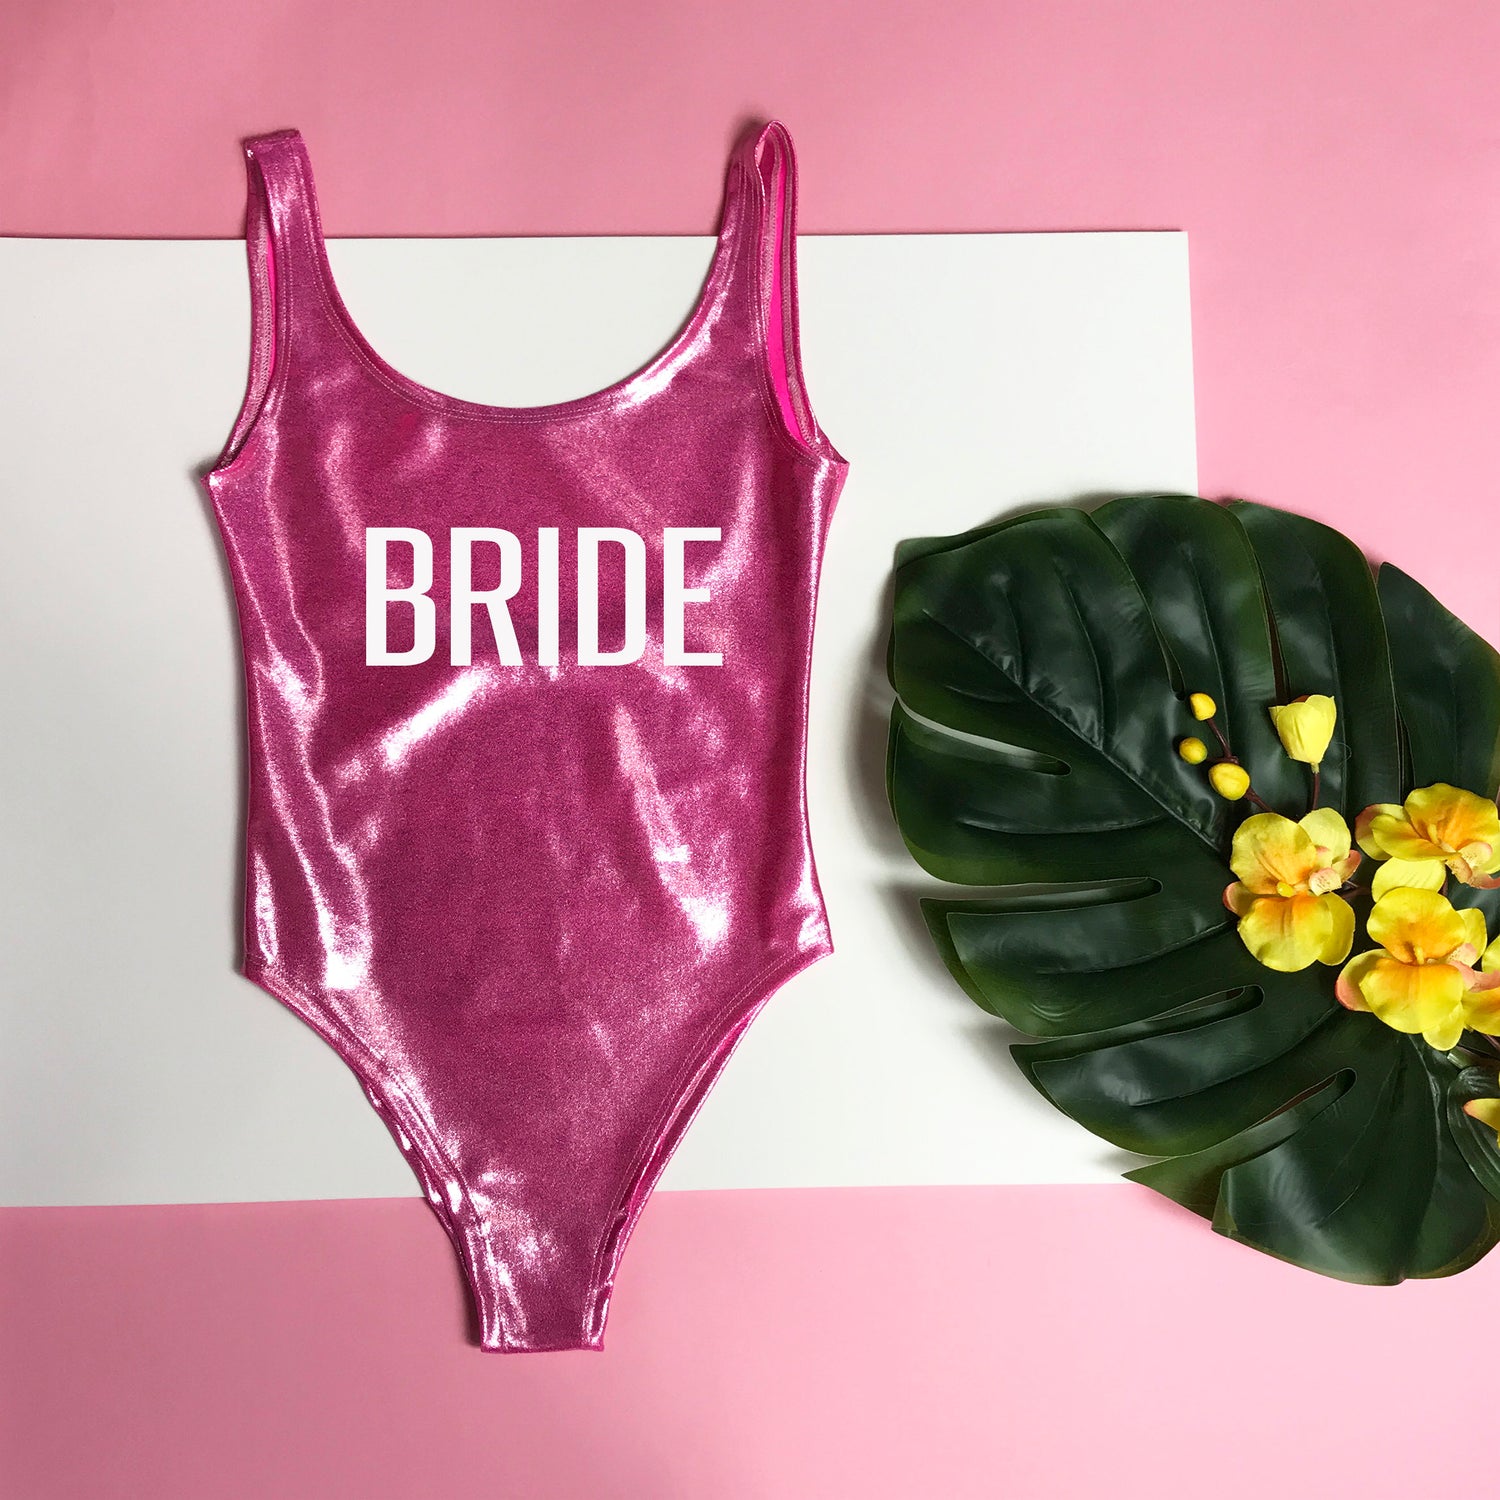 Bride &amp; Team Bride One-Piece Swimsuit, Holographic Bathing Suit, Printed Bathing Suit, Gold Printing, Bride Swimsuit, Team Bride Swimsuit, DSY Lifestyle Swimwear, Pink Swimsuit, Made in LA